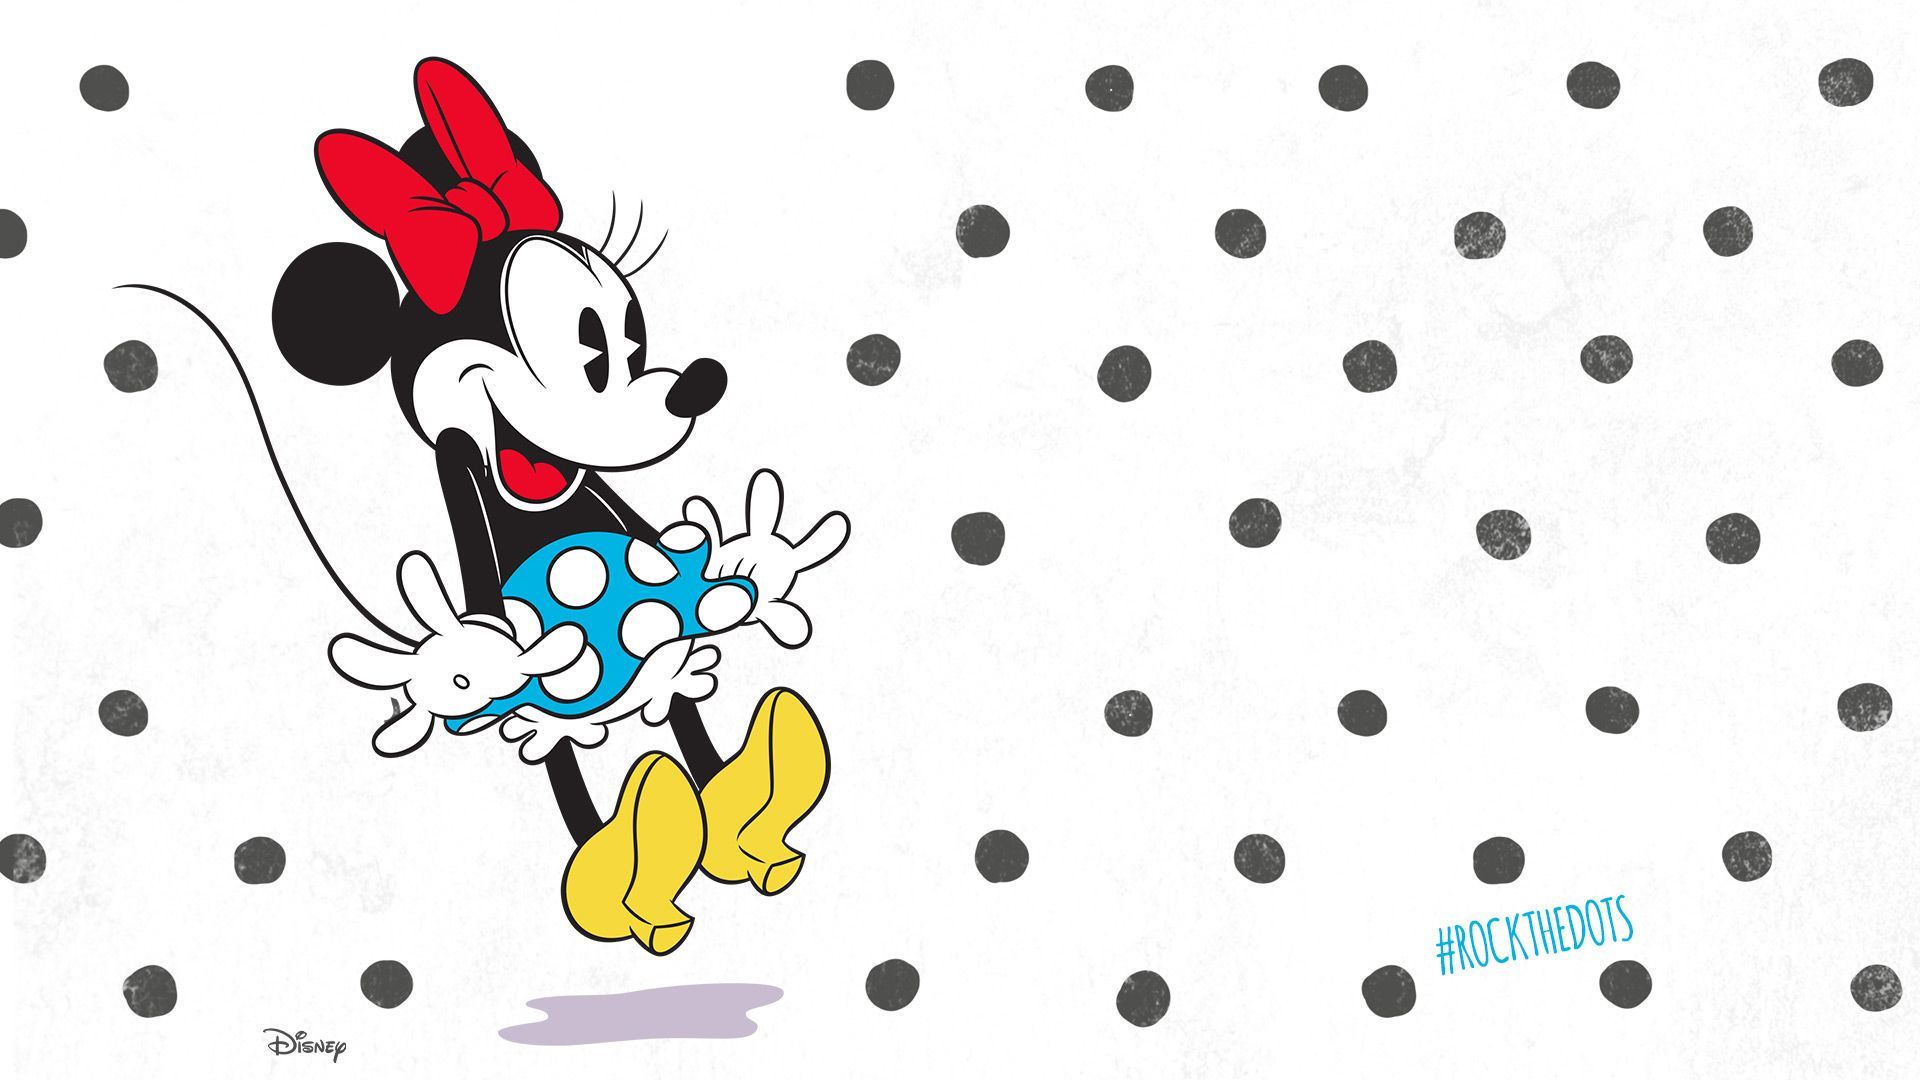 Minnie Mouse wallpaper with polka dots and the hashtag #MinnieMoods - Minnie Mouse